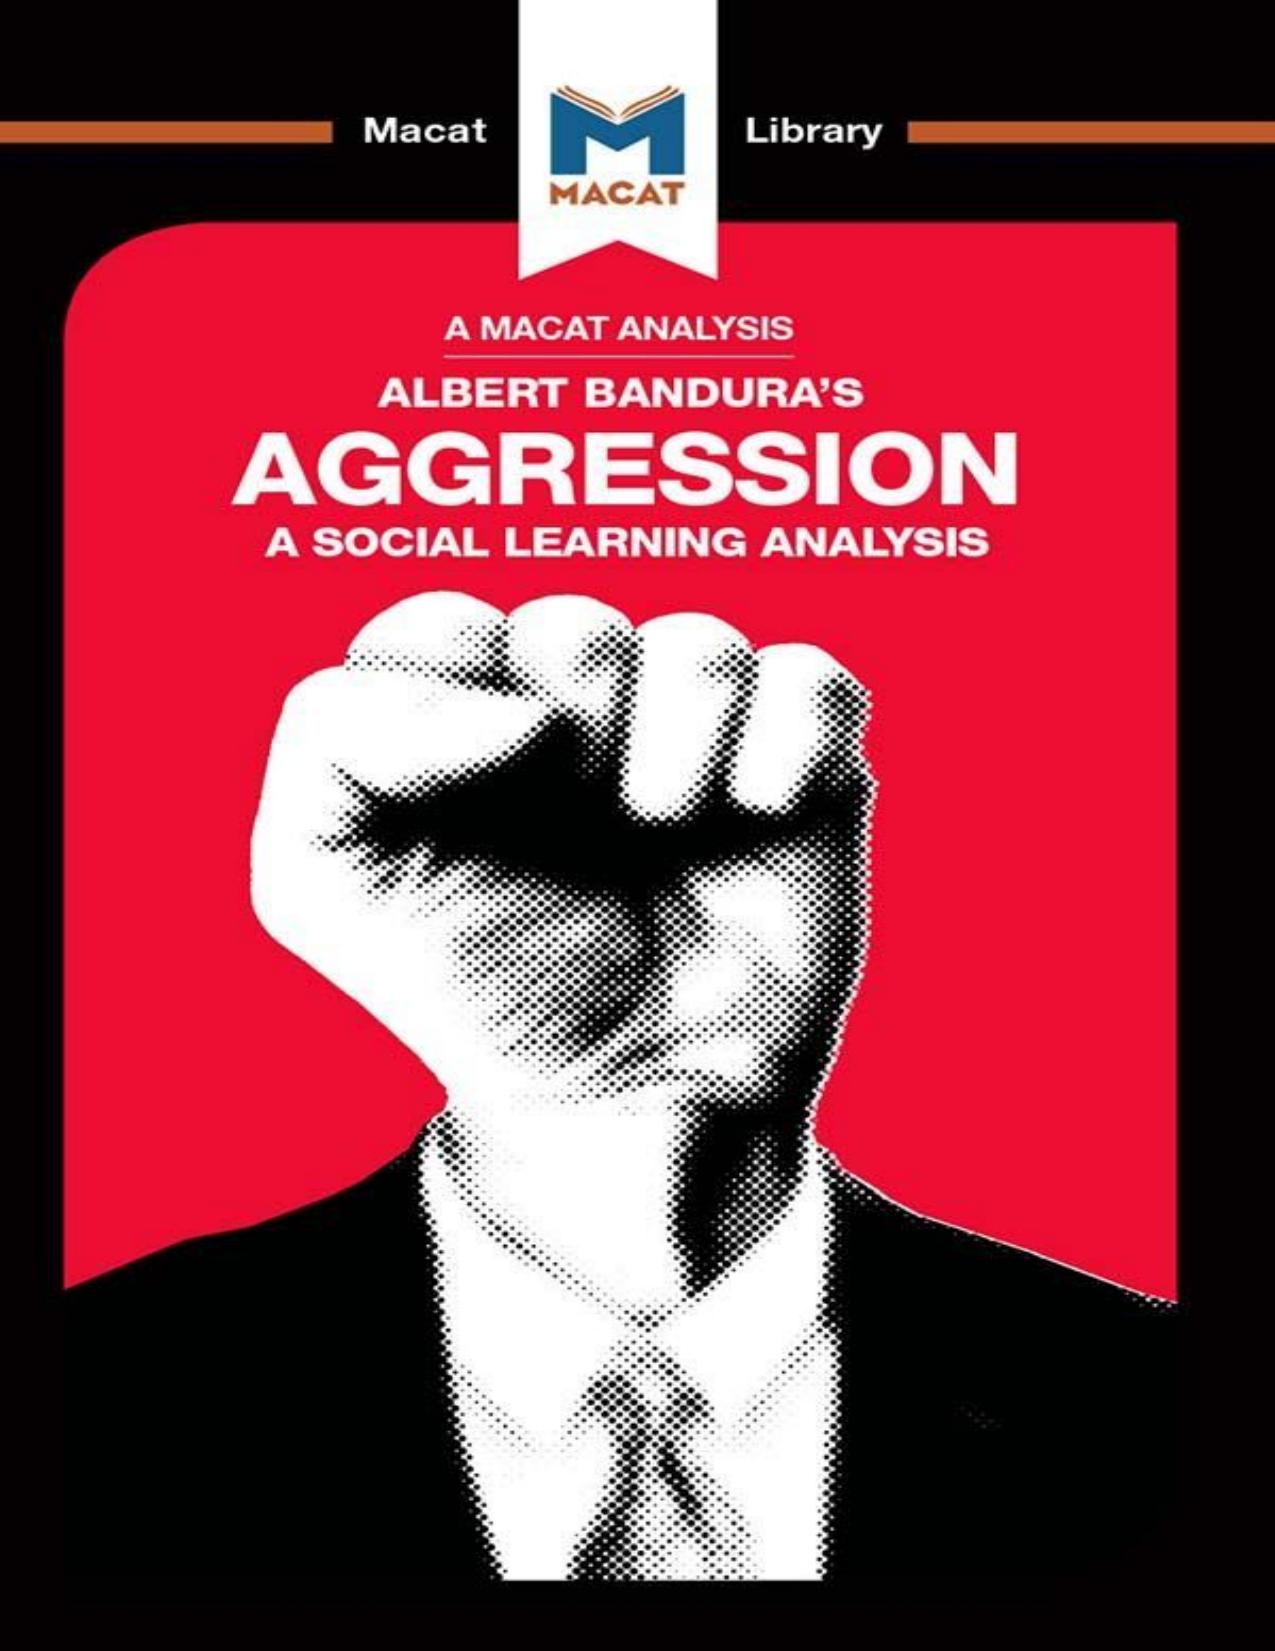 An Analysis of Albert Bandura's Aggression: A Social Learning Analysis (The Macat Library) by Jacqueline Allan